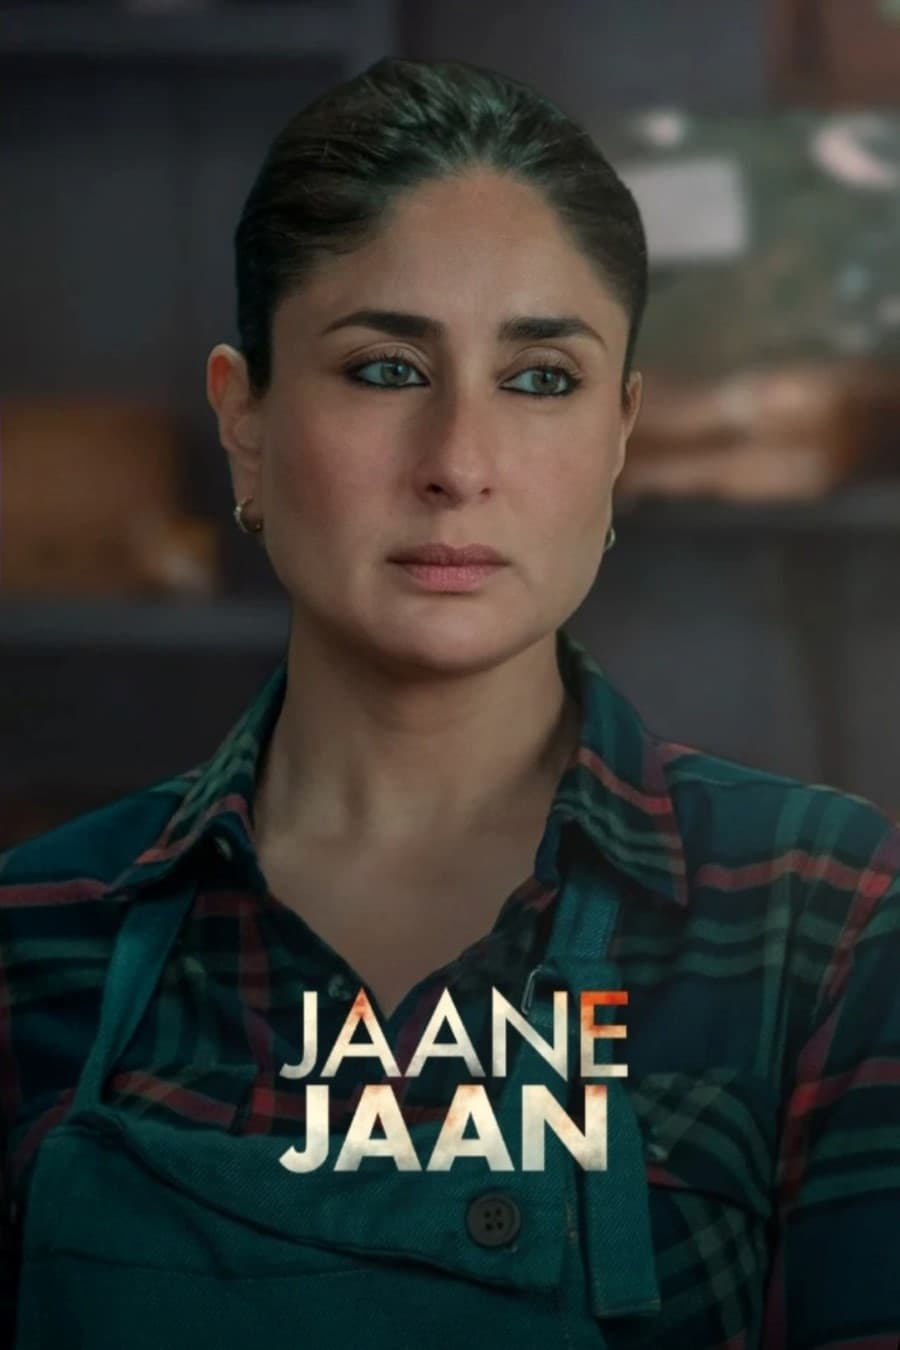 Fast forward to 2023, Kareena takes on a new role in the OTT release 'Jaane Jaan'. She opts for a more fresh-faced and casual style as she portrays a mother